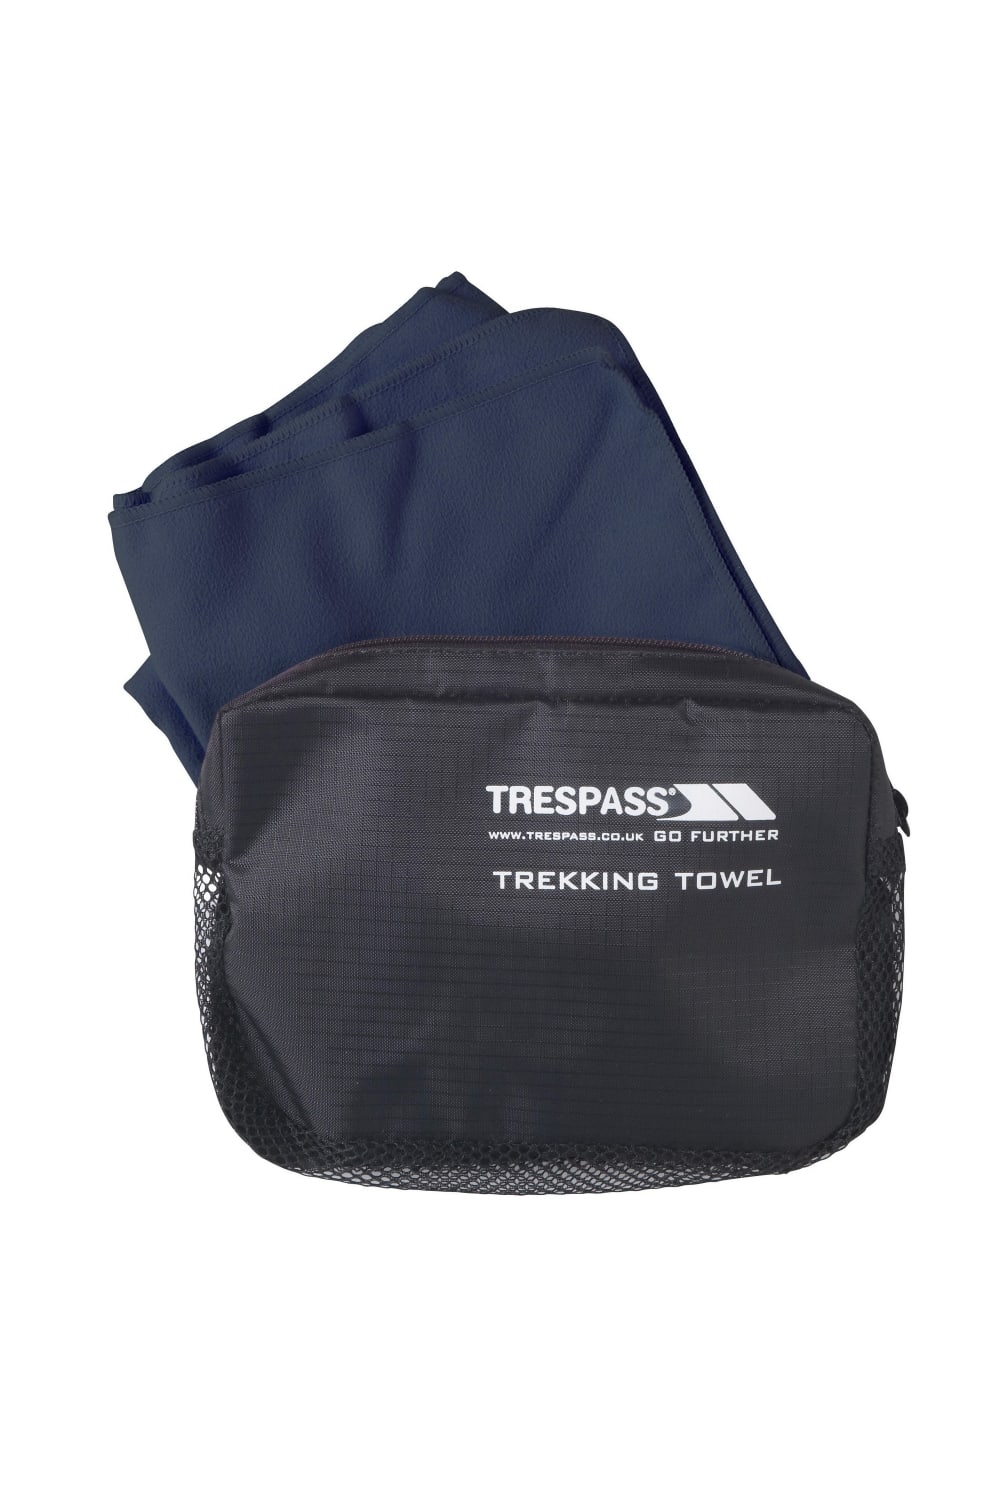 Trespass Soaked Anti-bacterial Sports Towel (Navy Blue) (One Size)